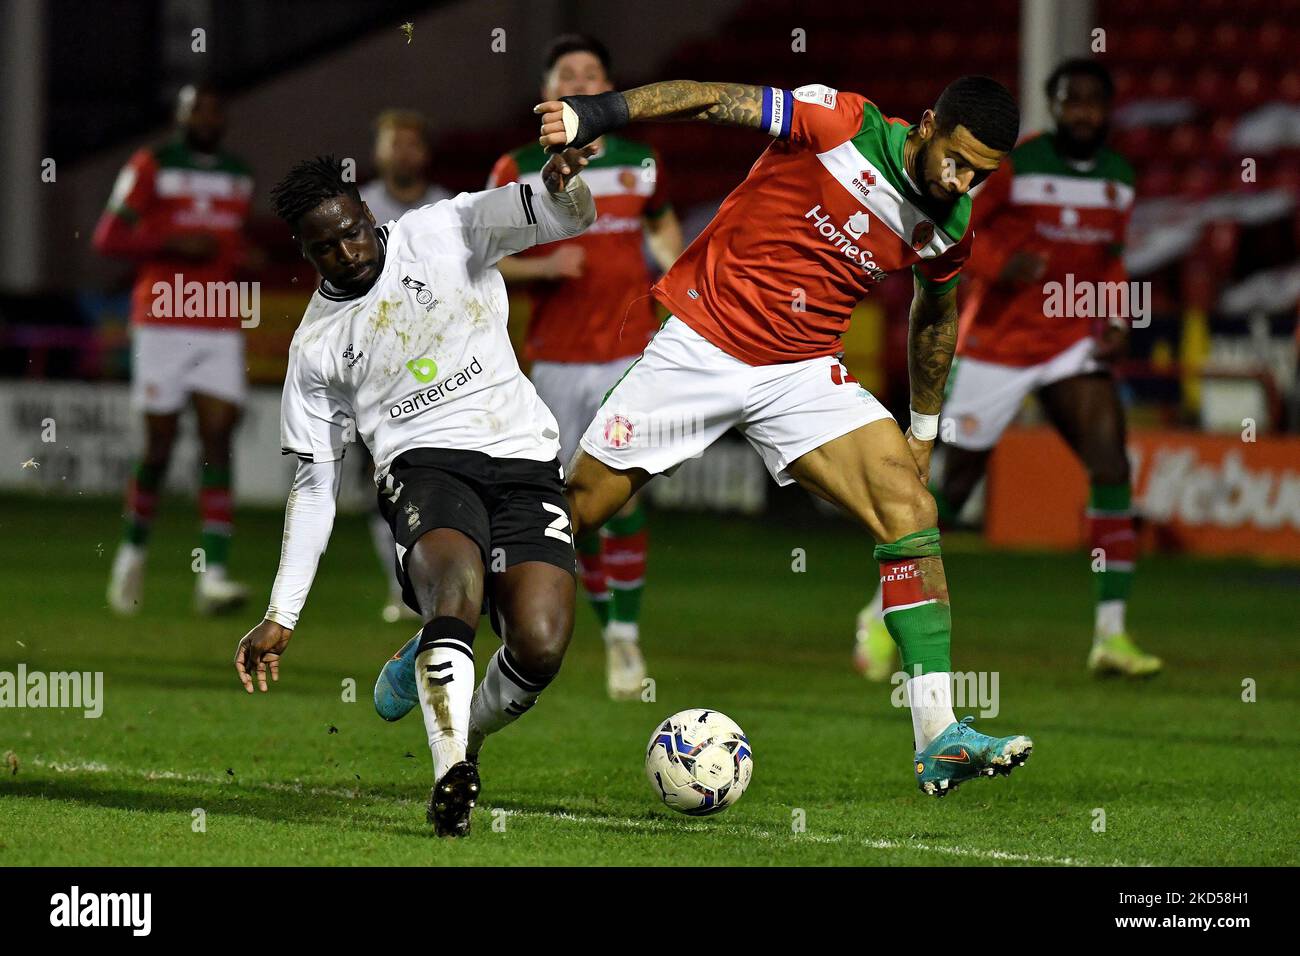 Oldham Athletic's Christopher Missilou tussles with Joss Labadie of Walsall Football Club during the Sky Bet League 2 match between Walsall and Oldham Athletic at the Banks's Stadium, Walsall on Tuesday 15th March 2022. (Photo by Eddie Garvey/MI News/NurPhoto) Stock Photo